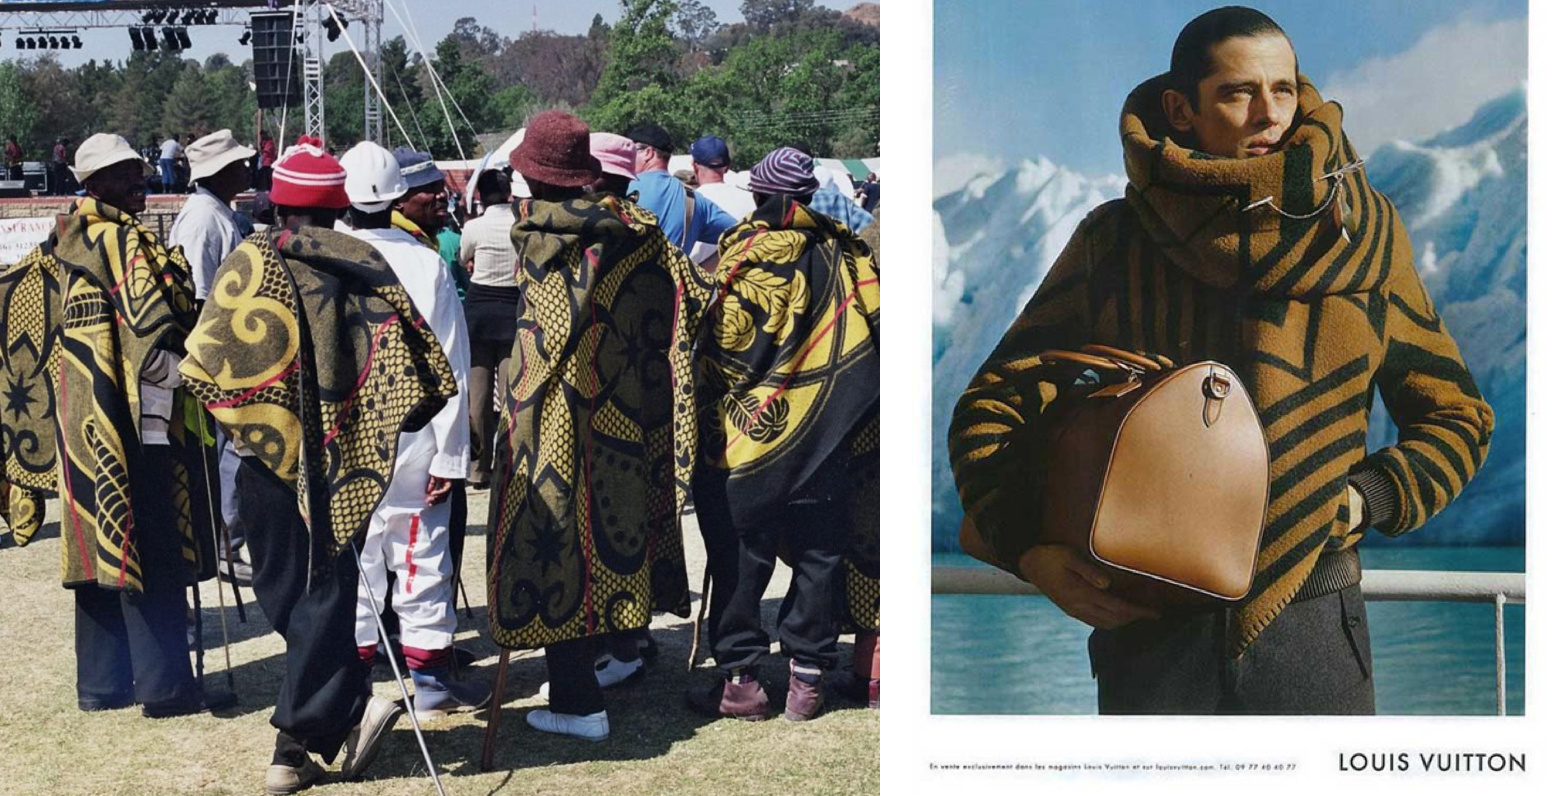 UPDATED: The Tanzania People That Have Been Copied by DVF, Land